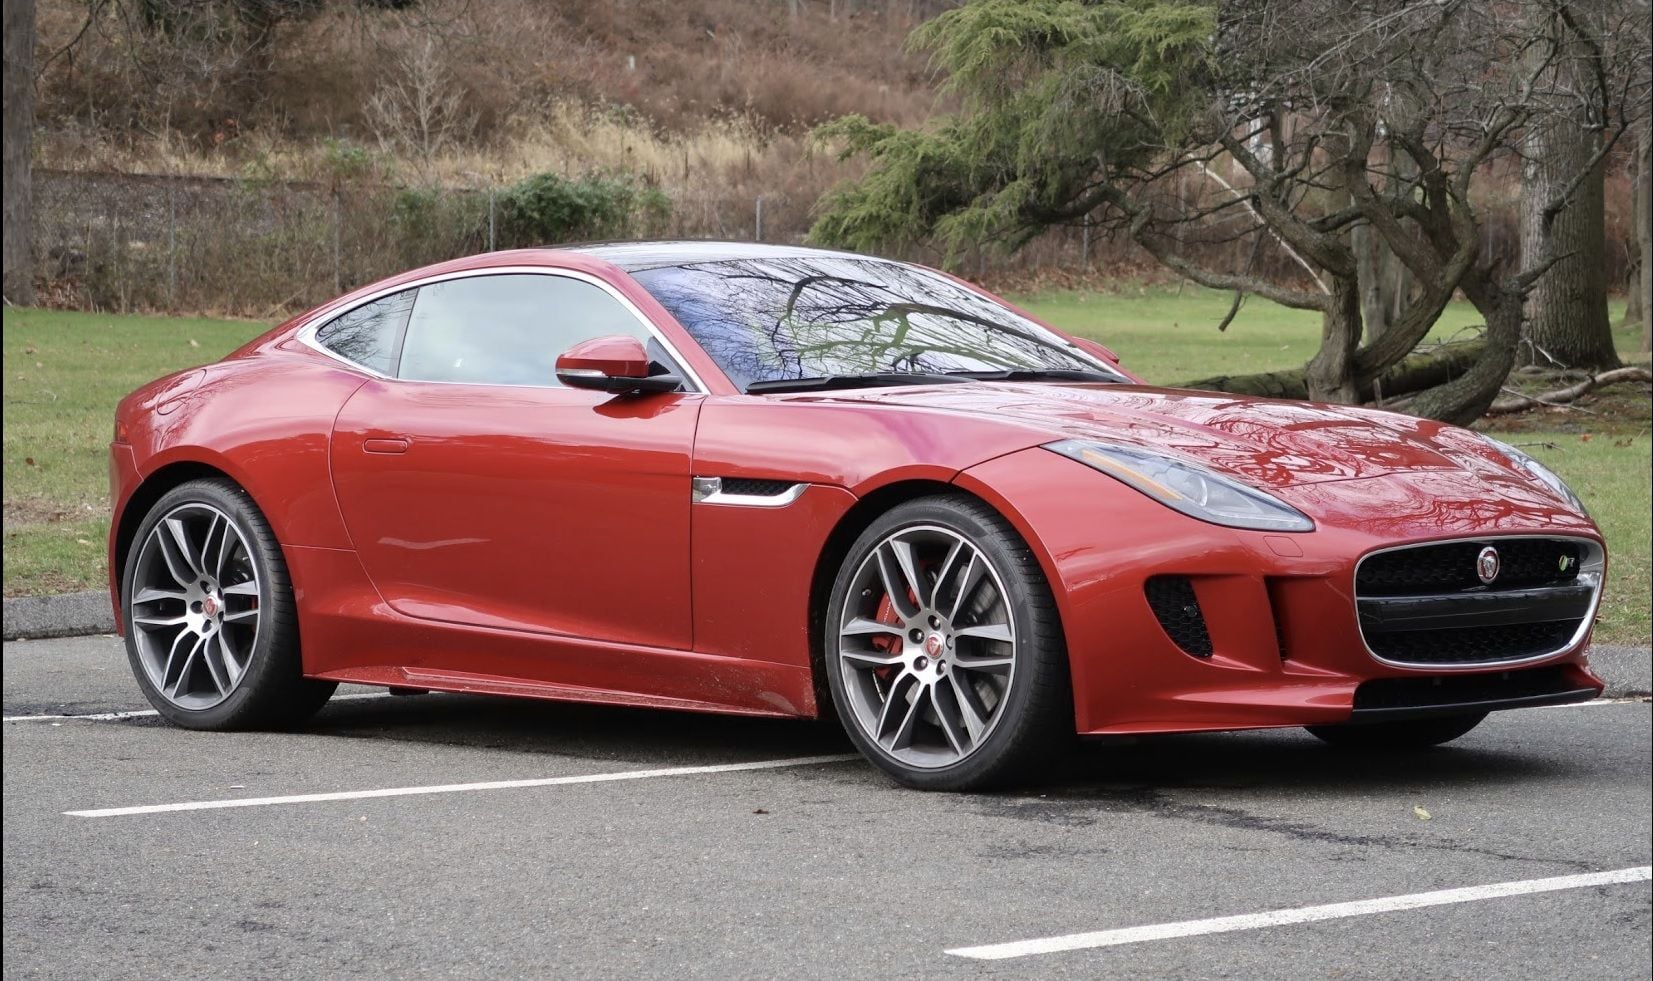 2017 Jaguar F-Type - 2017 F Type R - New - VIN SAJWJ6DL2HMK40588 - 450 Miles - 8 cyl - 4WD - Automatic - Coupe - Red - Stamford, CT 06905, United States